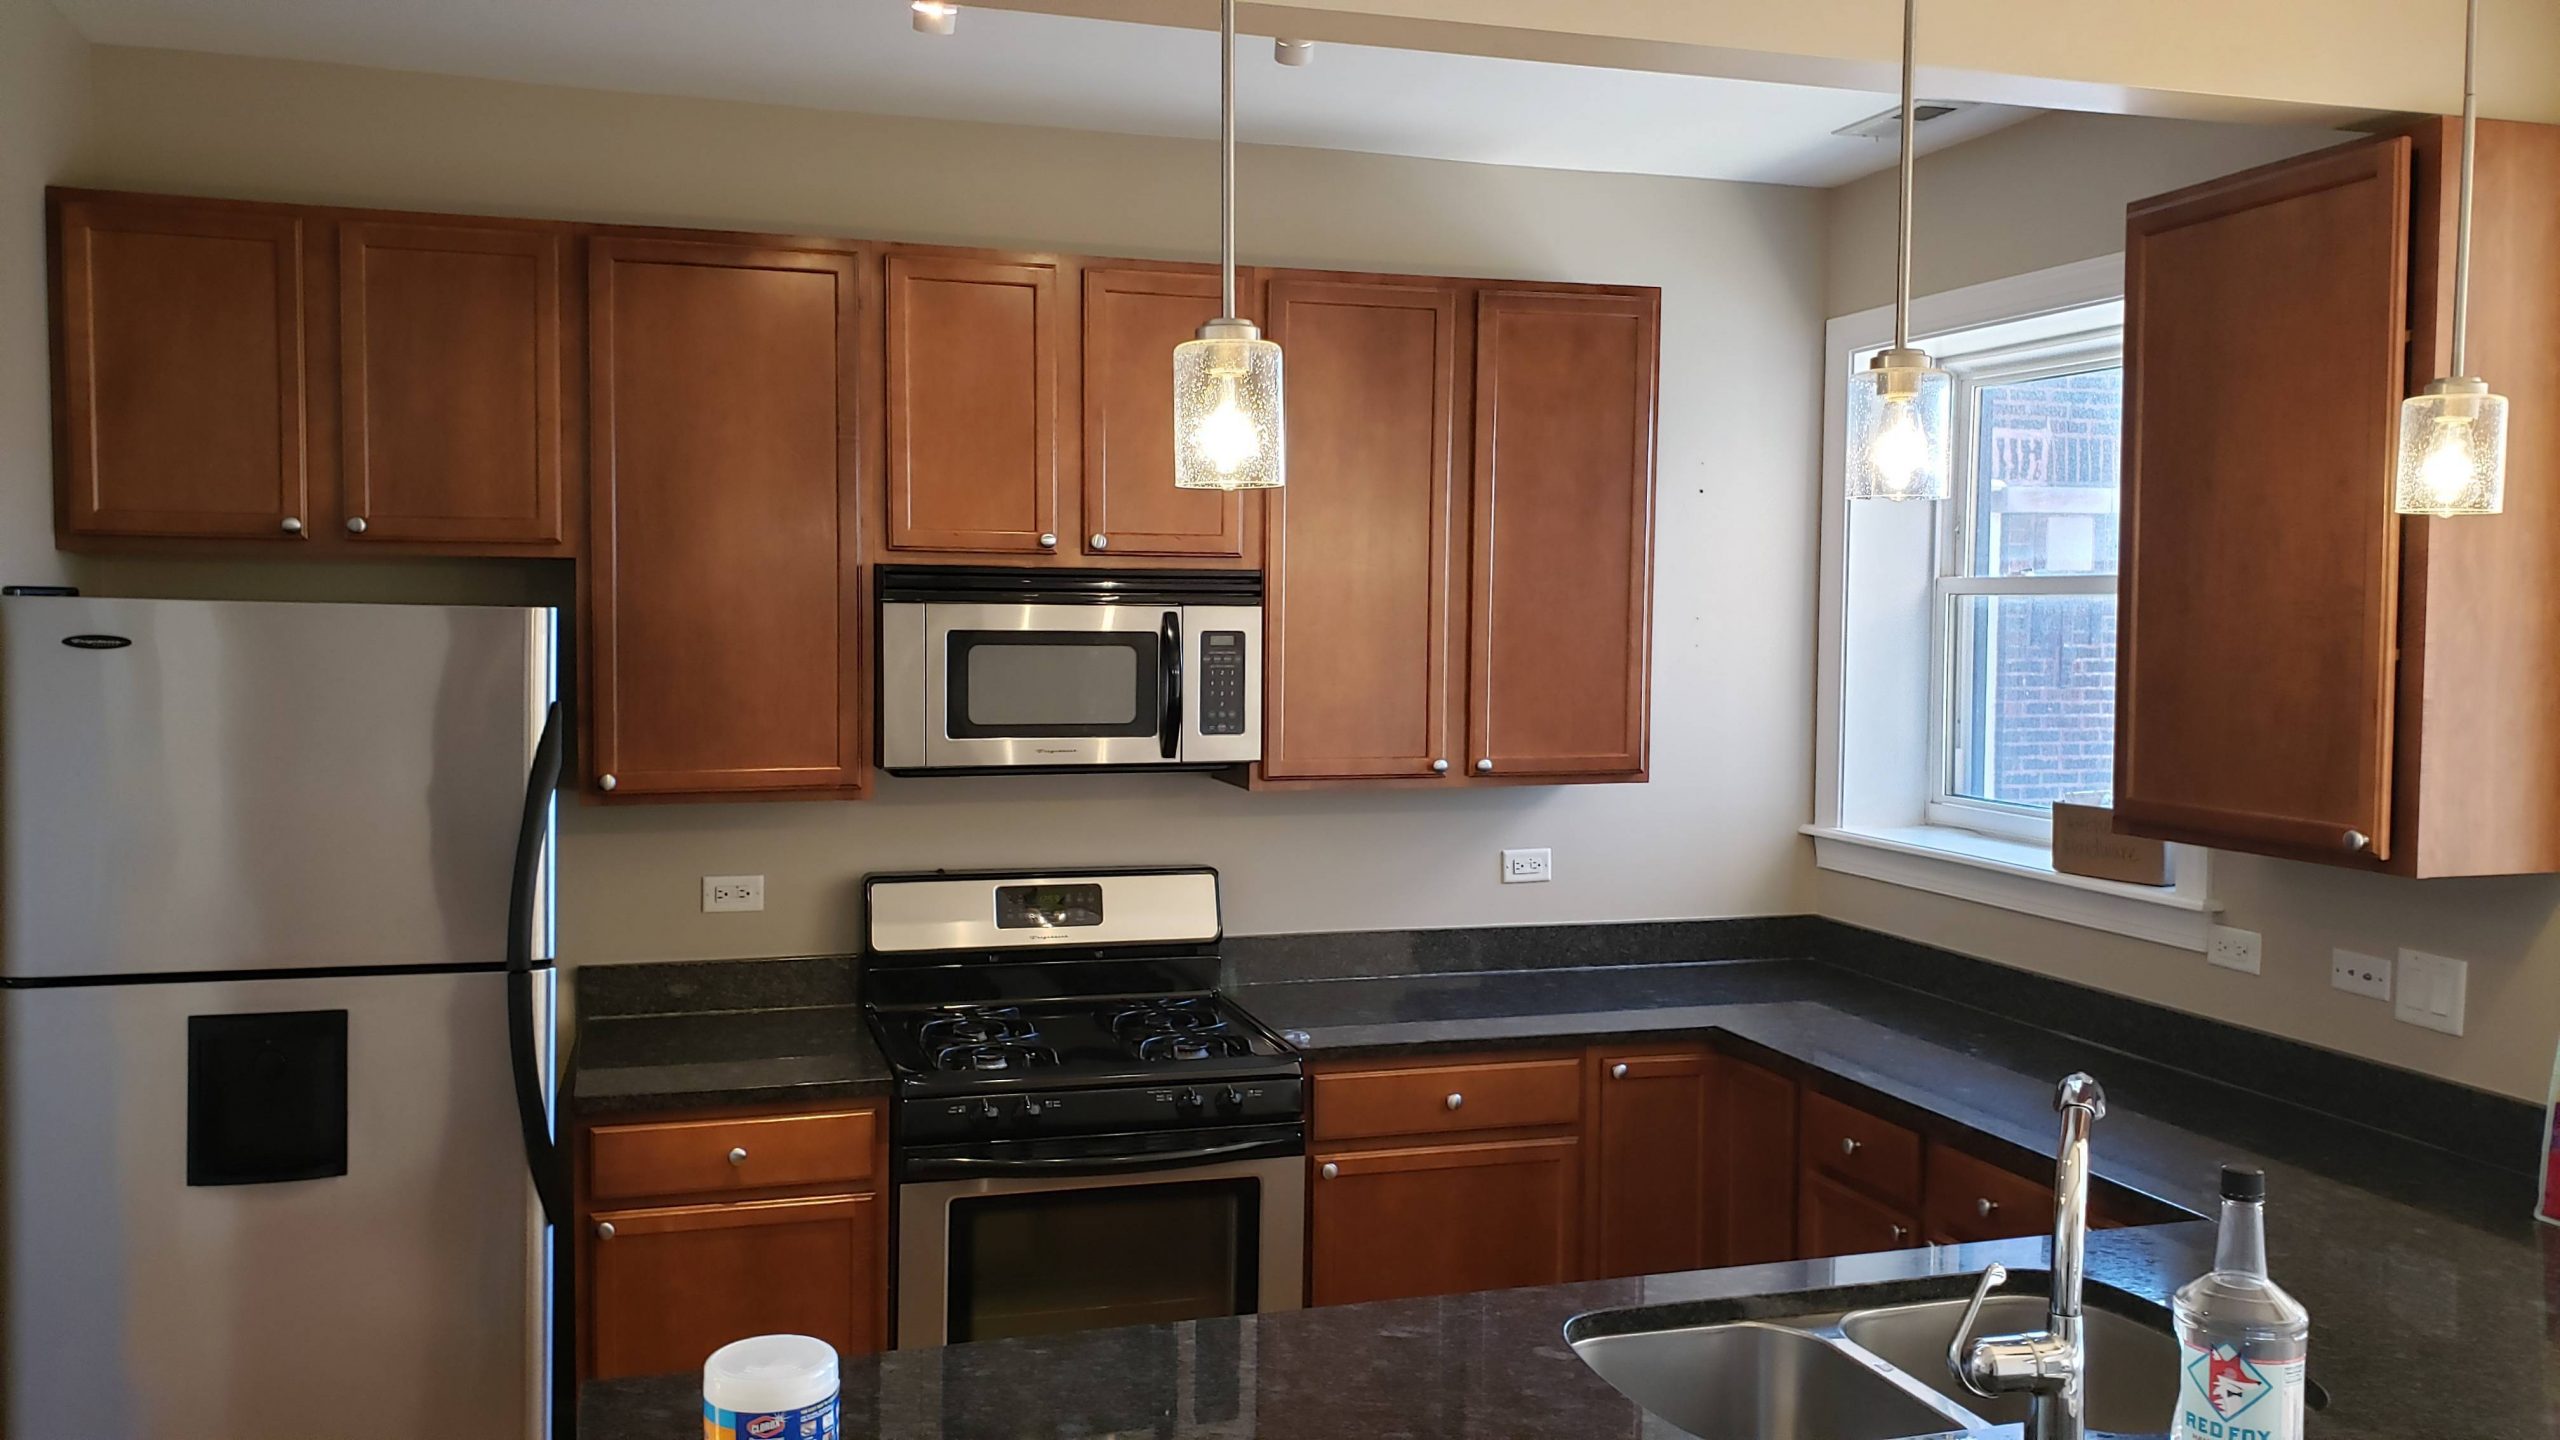 2020.04.22_Lakeview_Kitchen_cabinets_painting - Chicago-painter.-Kitchen-cabinets-painting.-Lakeview-1.jpg